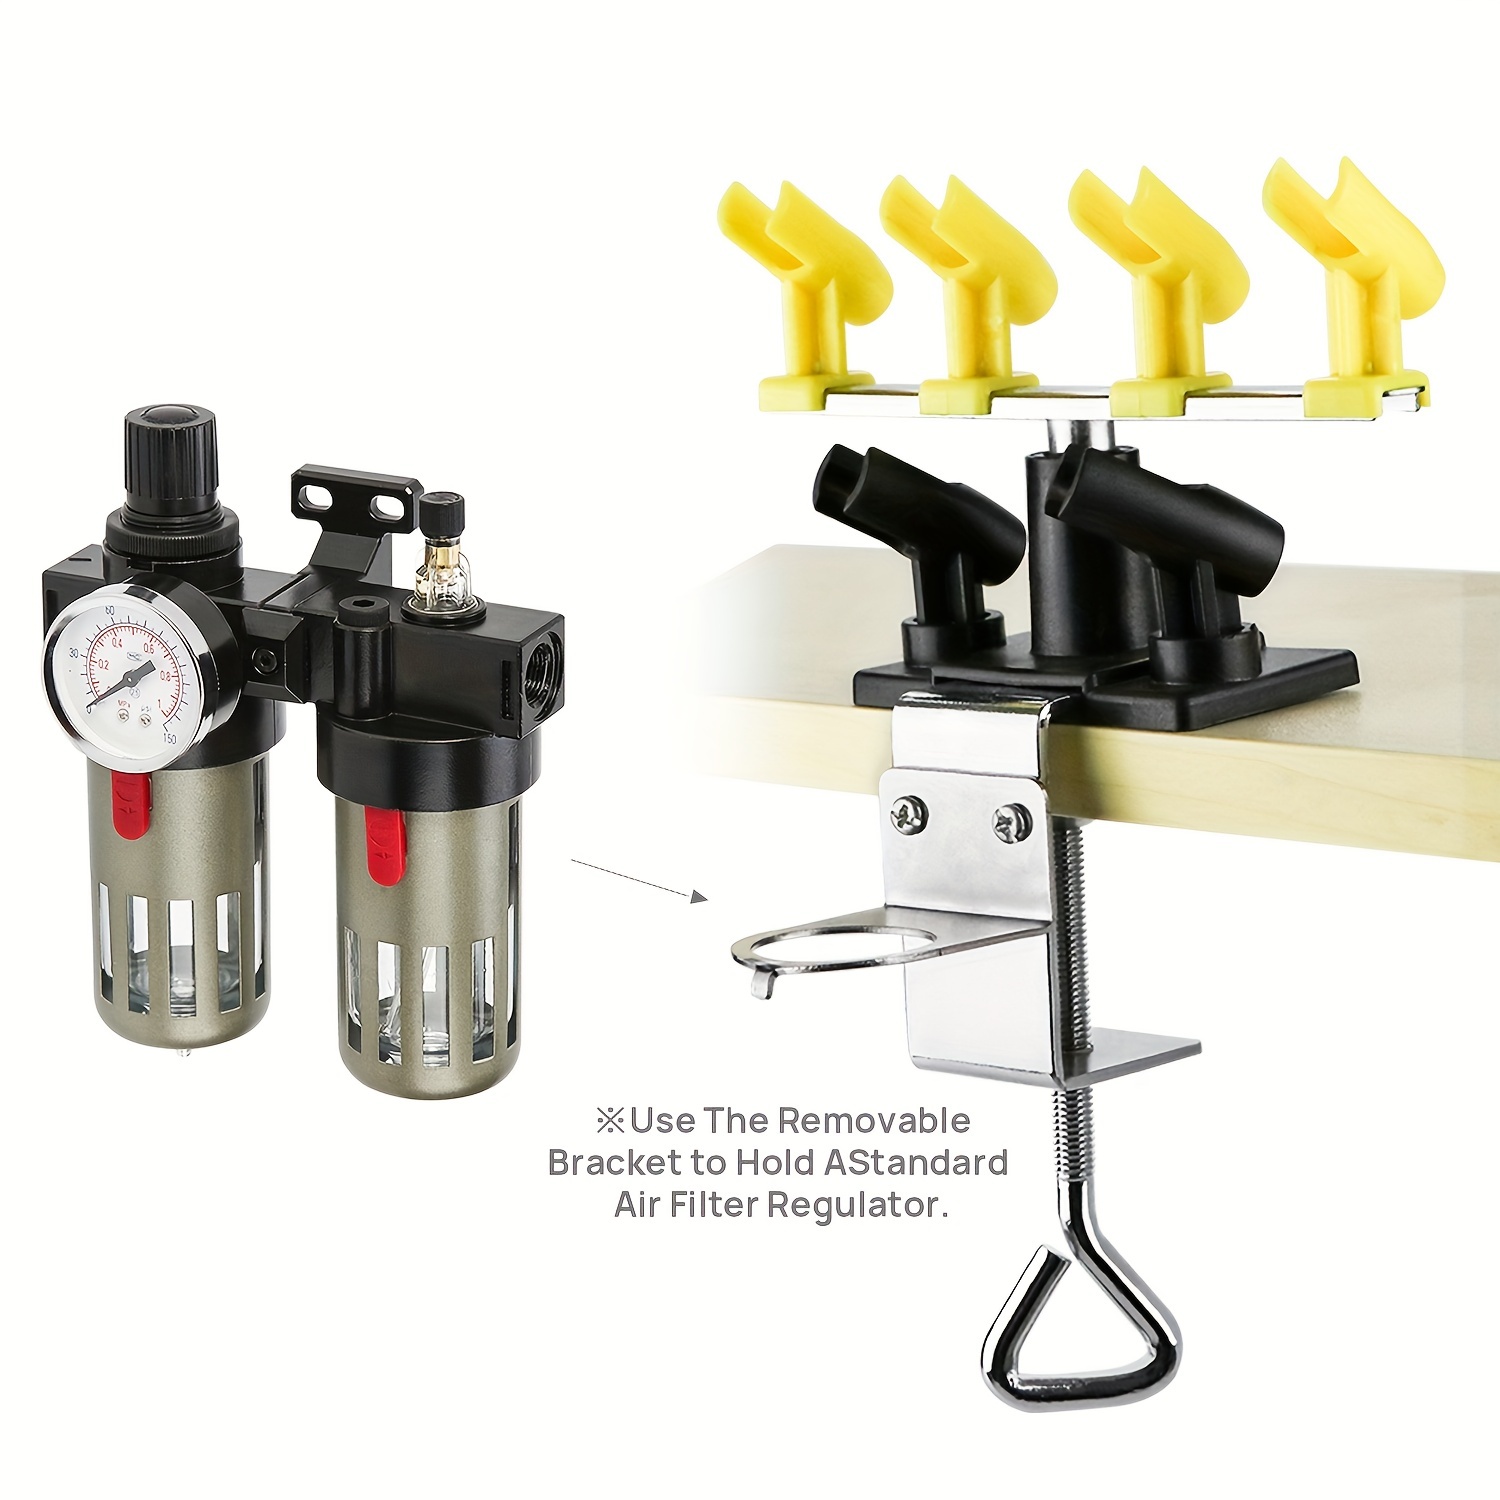 Universal Clamp-On Airbrush Holder that Holds Up to 6 Airbrushes, 6  Airbrush Holder - Fred Meyer